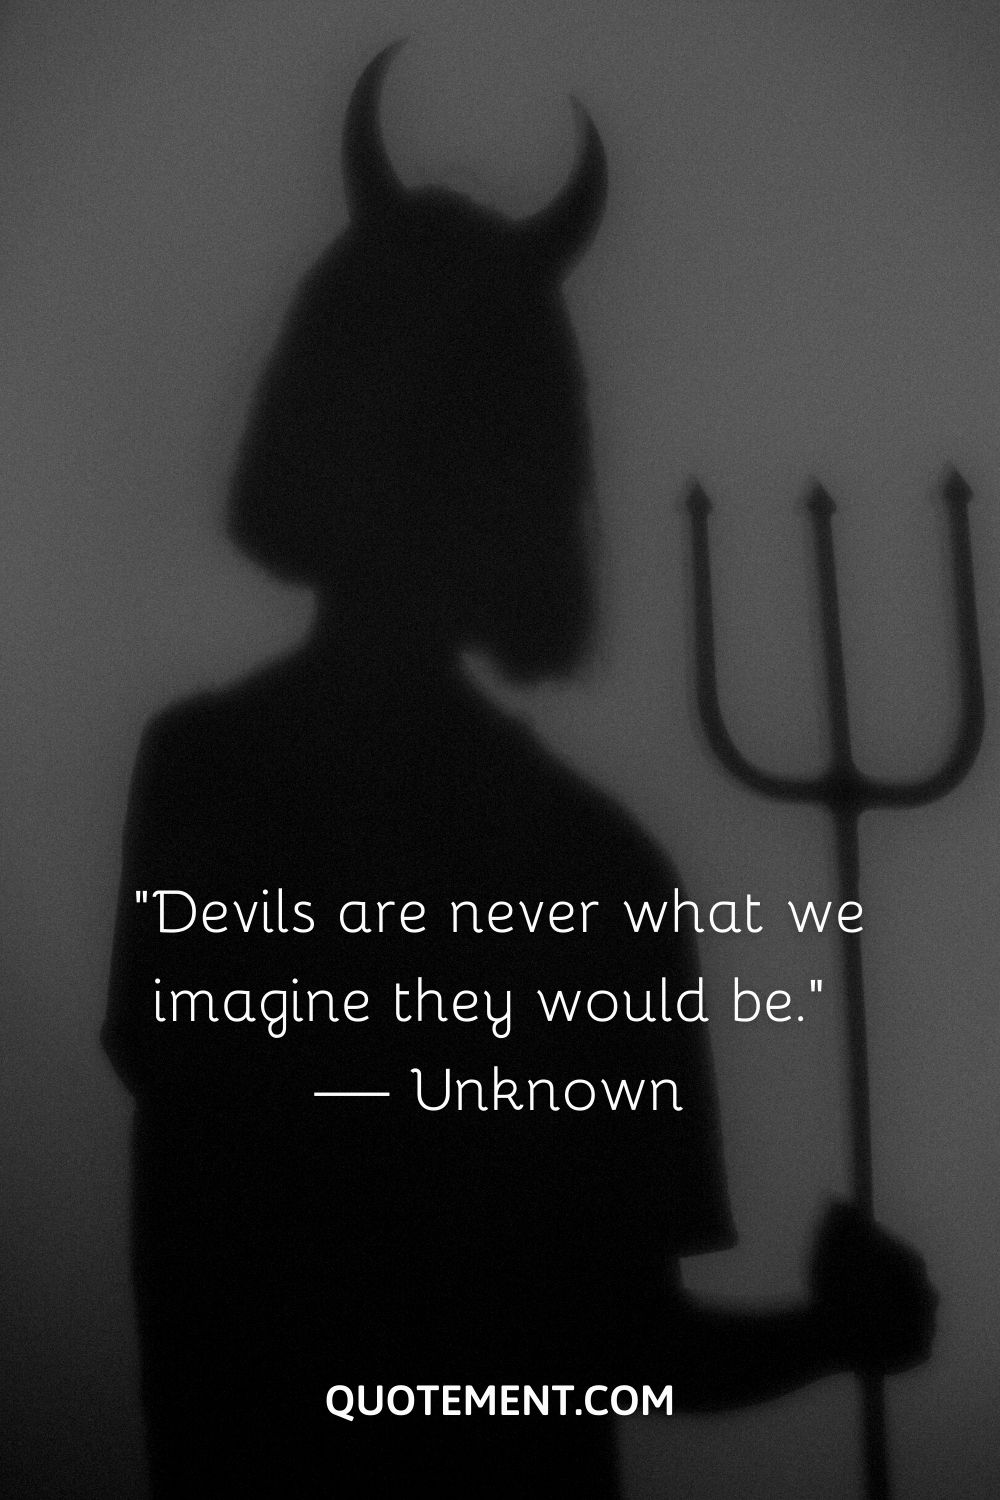 “Devils are never what we imagine they would be.” — Unknown